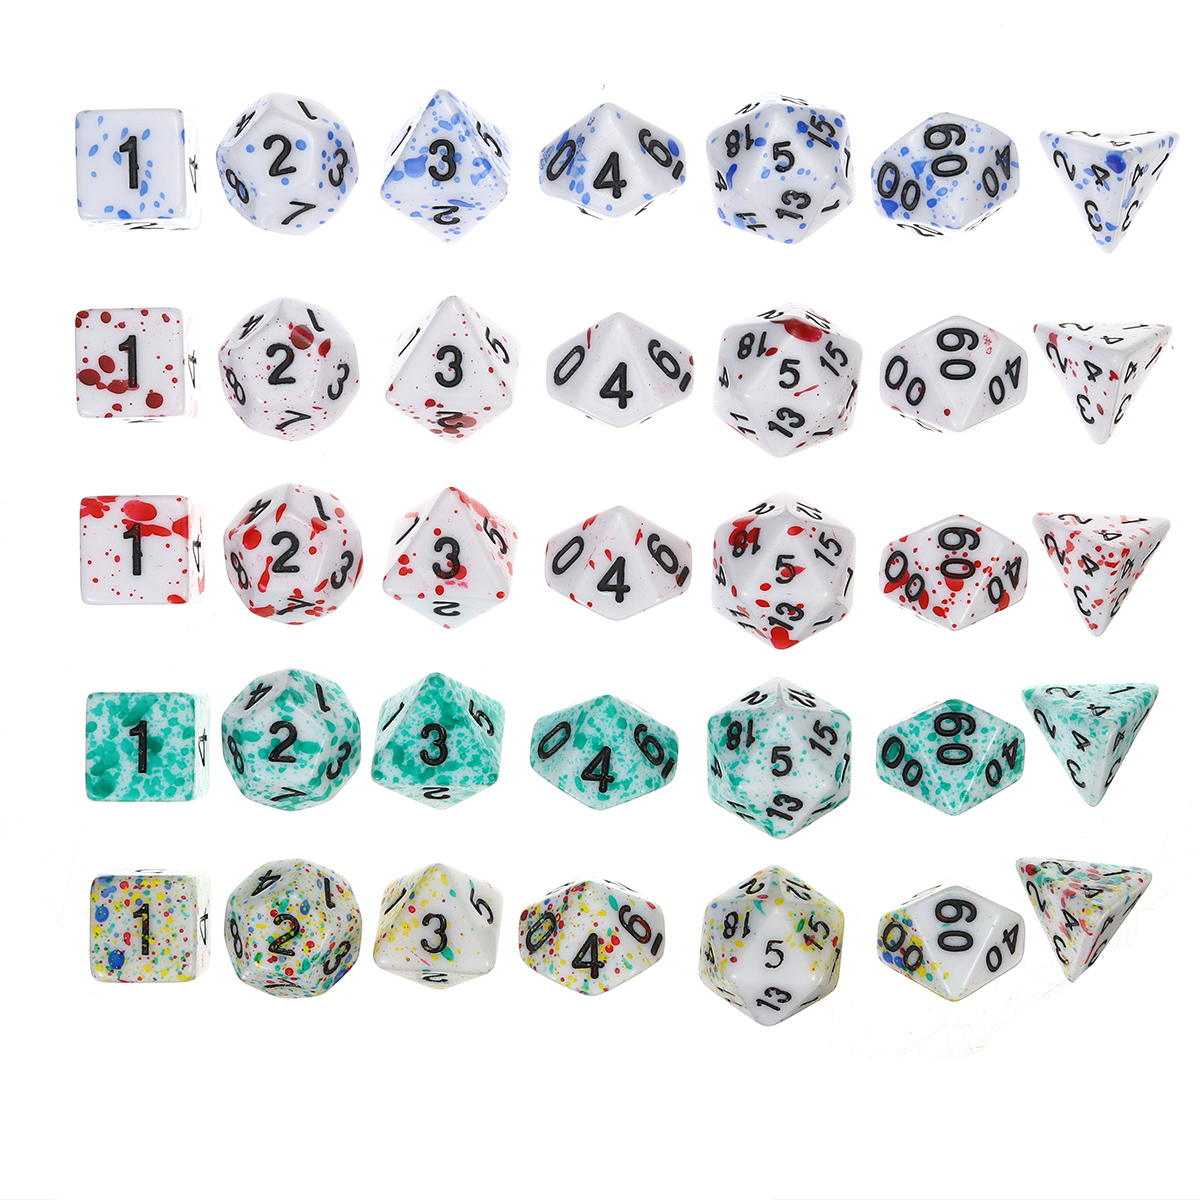 7PCS-Polyhedral-Dices-Set-For-DND-Dungeons--Dragons-Dice-Desktop-RPG-Game-1660865-4